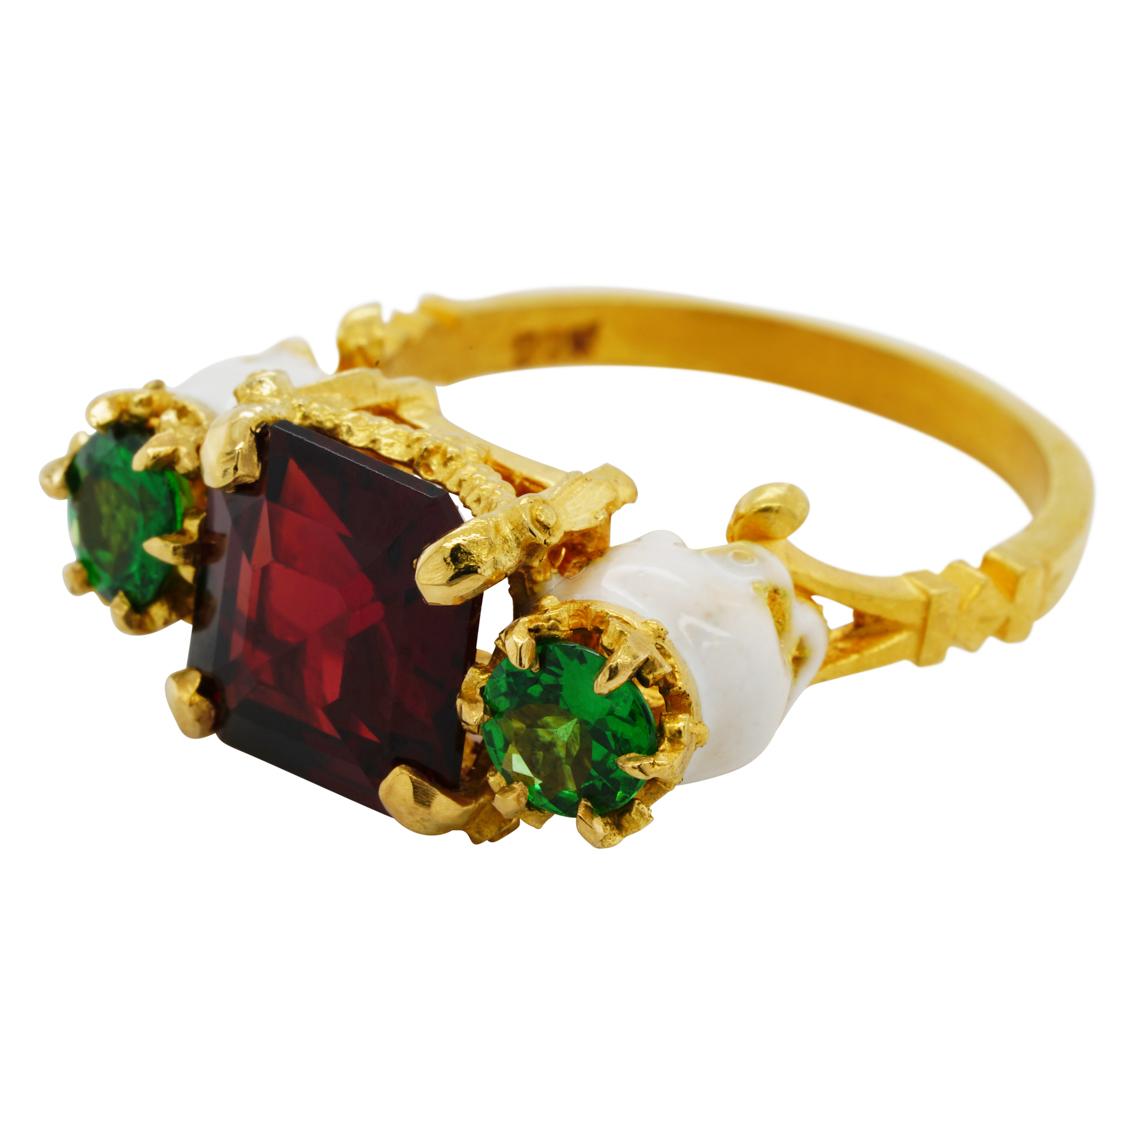 Catacomb Saints Garland Ring in 22 Karat Gold with Red and Tsavorite Garnets 1